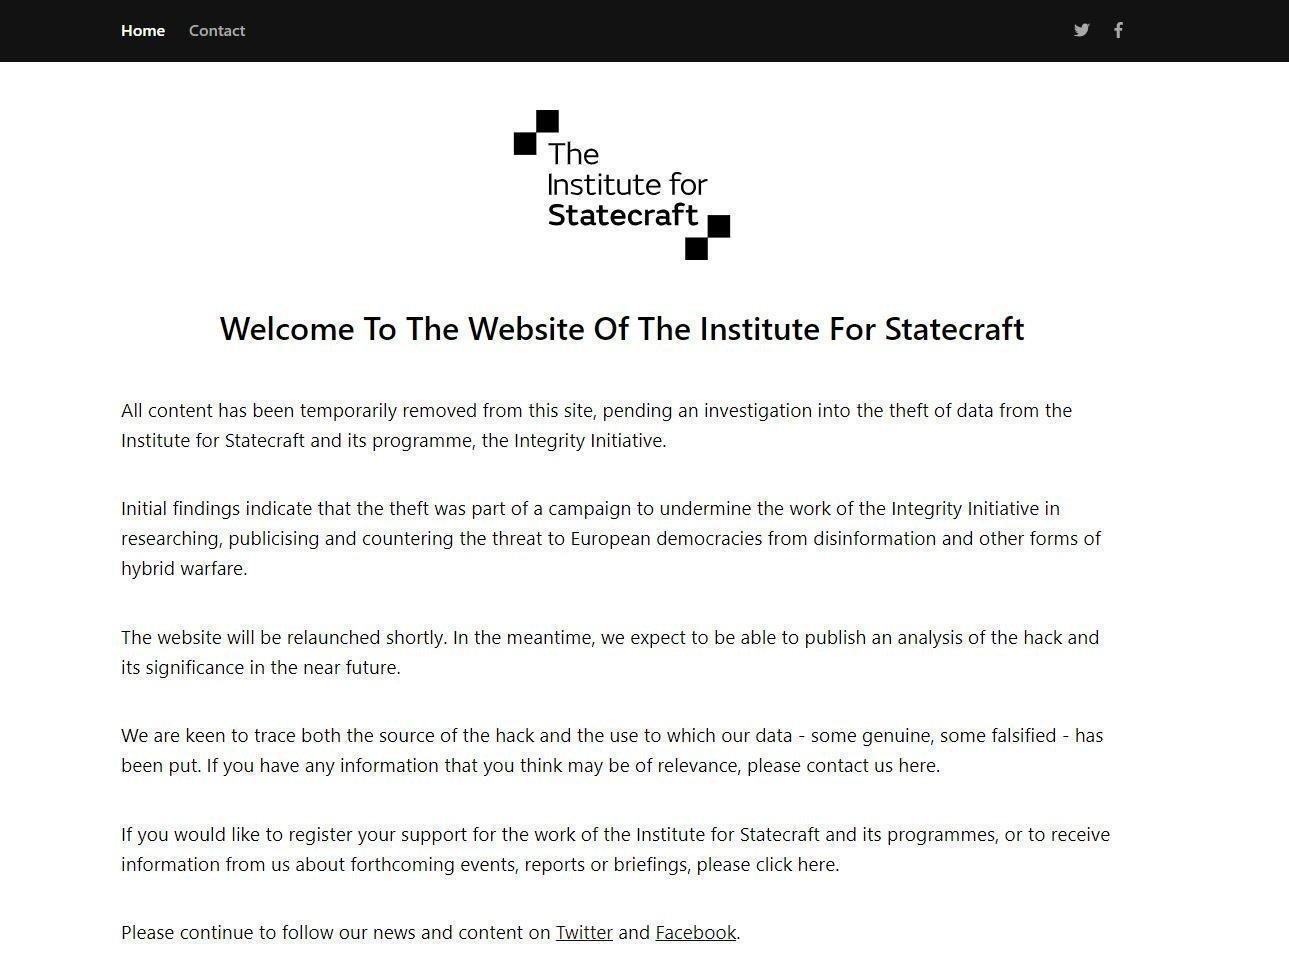 The home page of The Institute for Statecraft displays a message from the institute following a suspected cyber attack on the website.